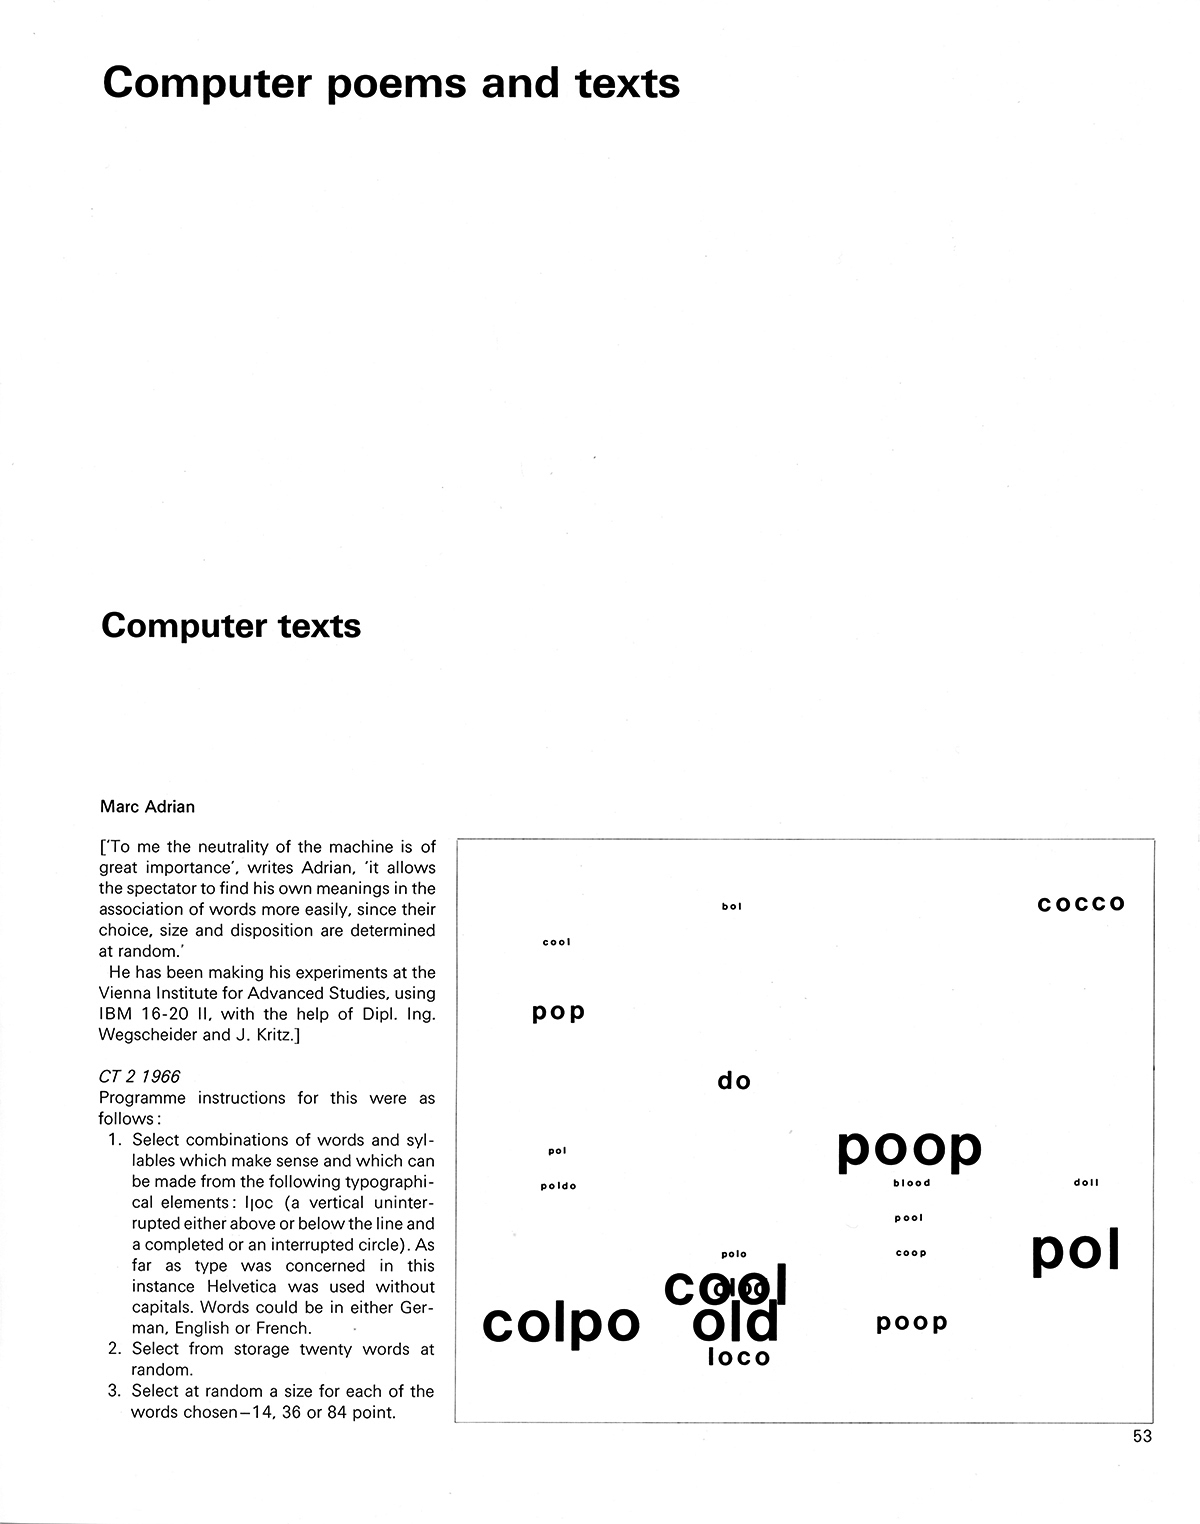 Computer poems an texts by Marc Adrian. Cybernetic Serendipity: The Computer and the Arts, Studio International Special Issue, 1968, page 53.